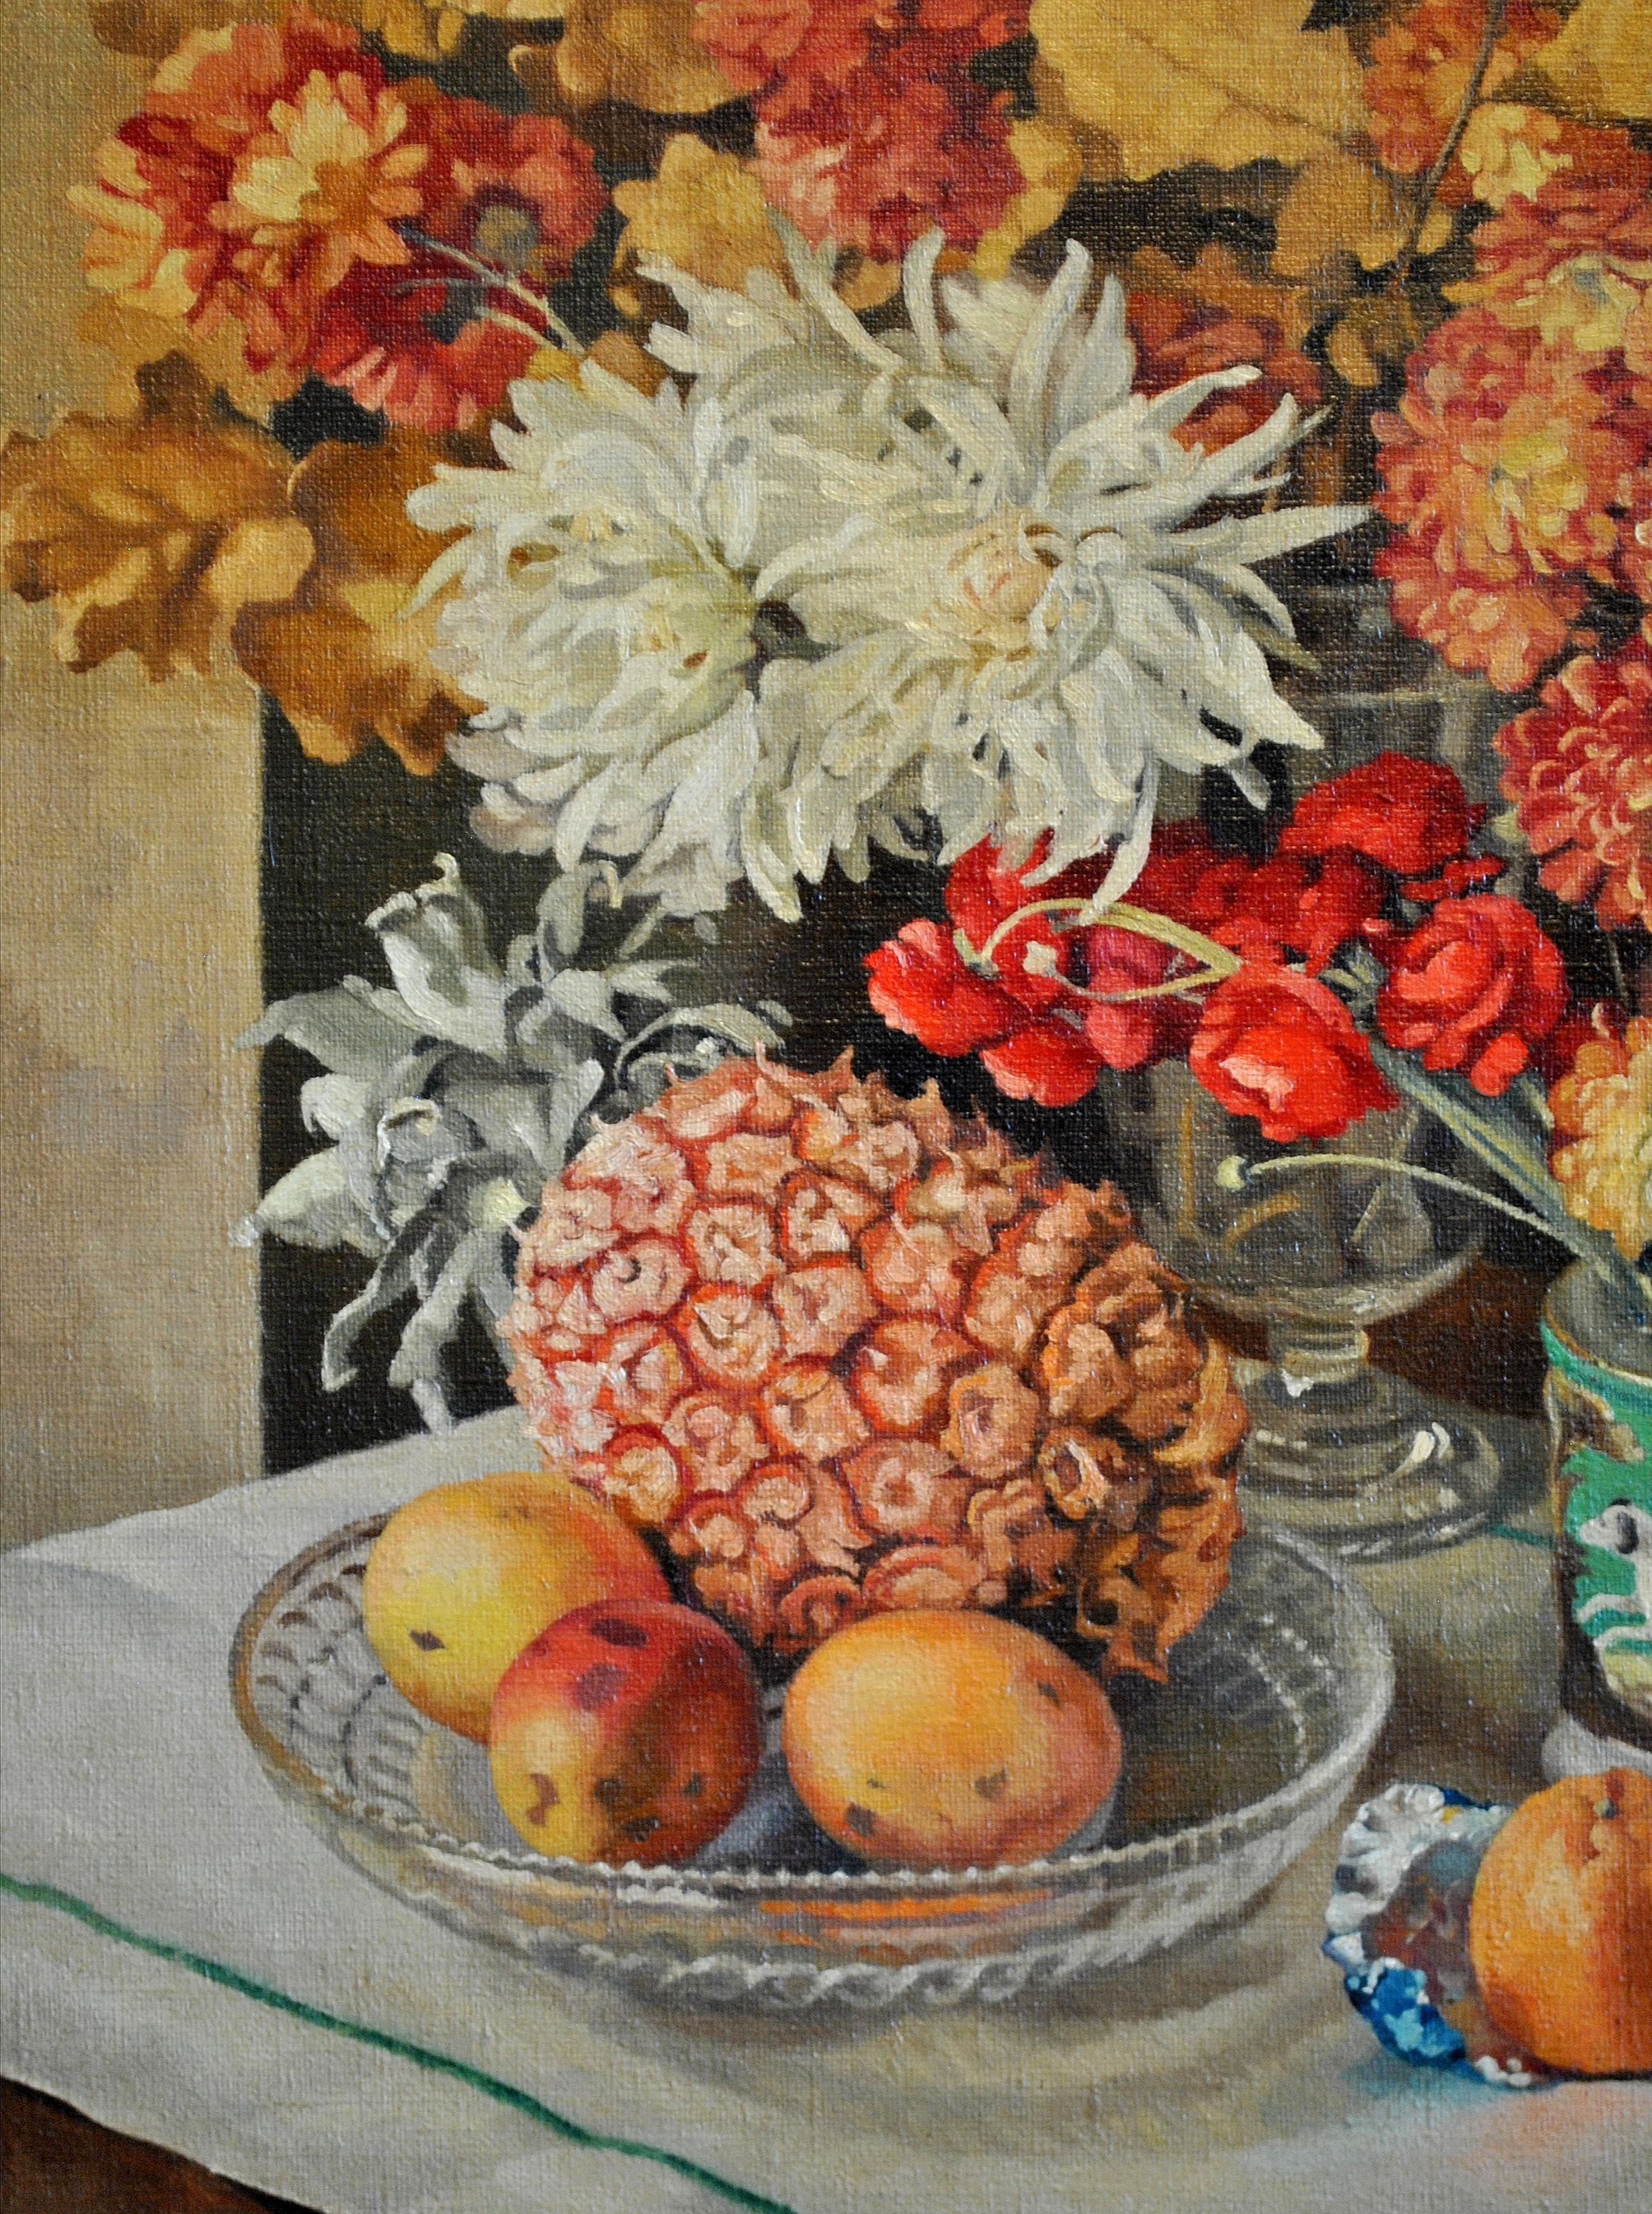 A beautiful signed and dated 1936 oil on canvas still life with flowers, pineapple, fruit and ceramic mug decorated with a pack of hounds, by Arthur Sleight. A striking and unusual Art Deco period painting.

Artist: Arthur Sleight (British,